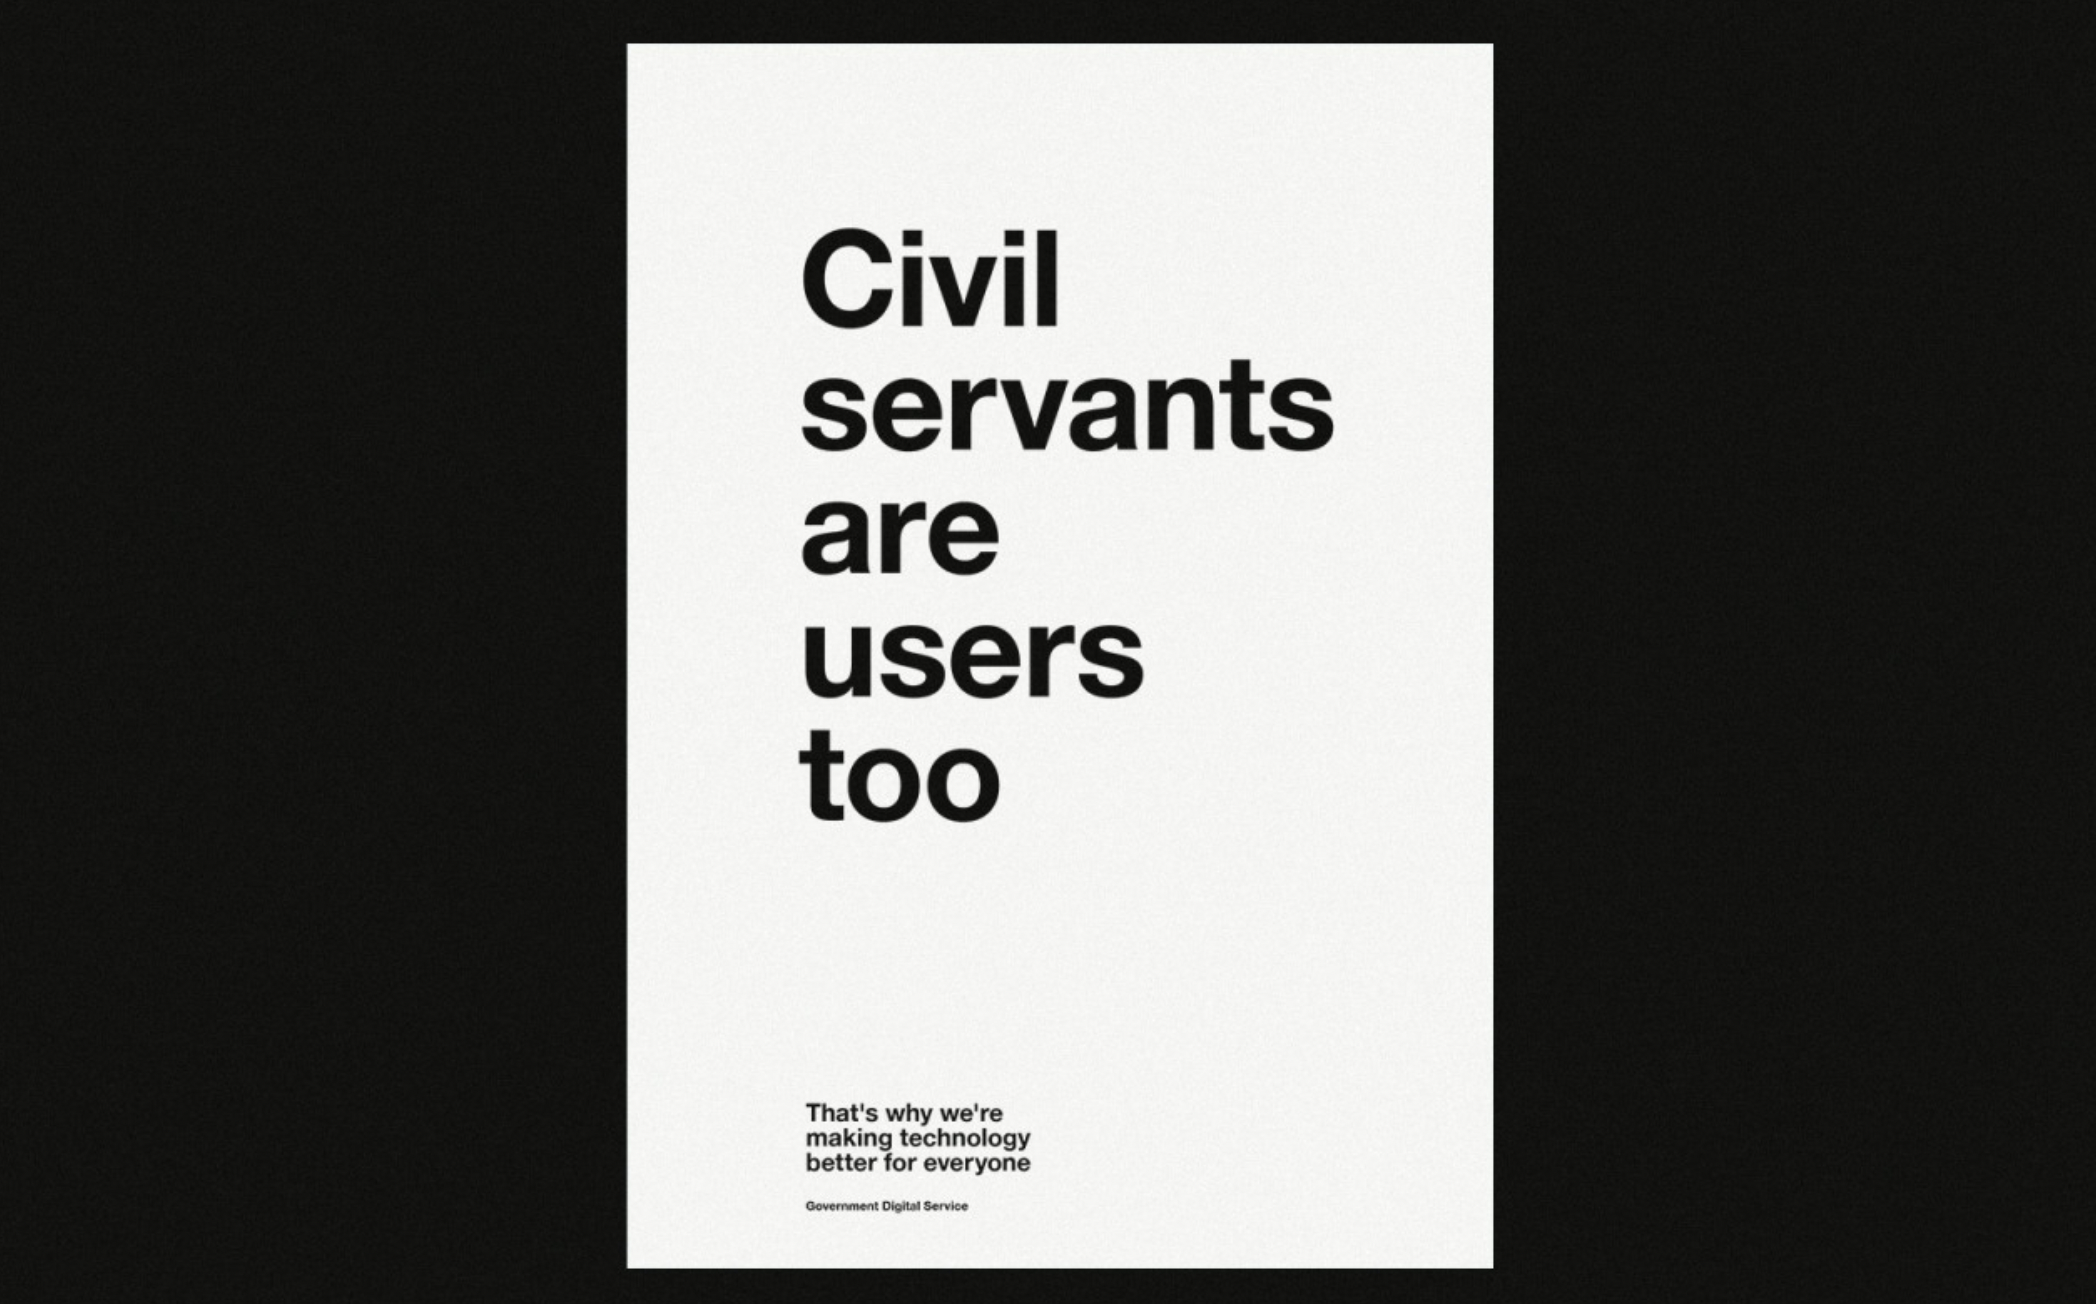 Image of a poster from the Government Digital Service that says 'Civil Servants are users too"